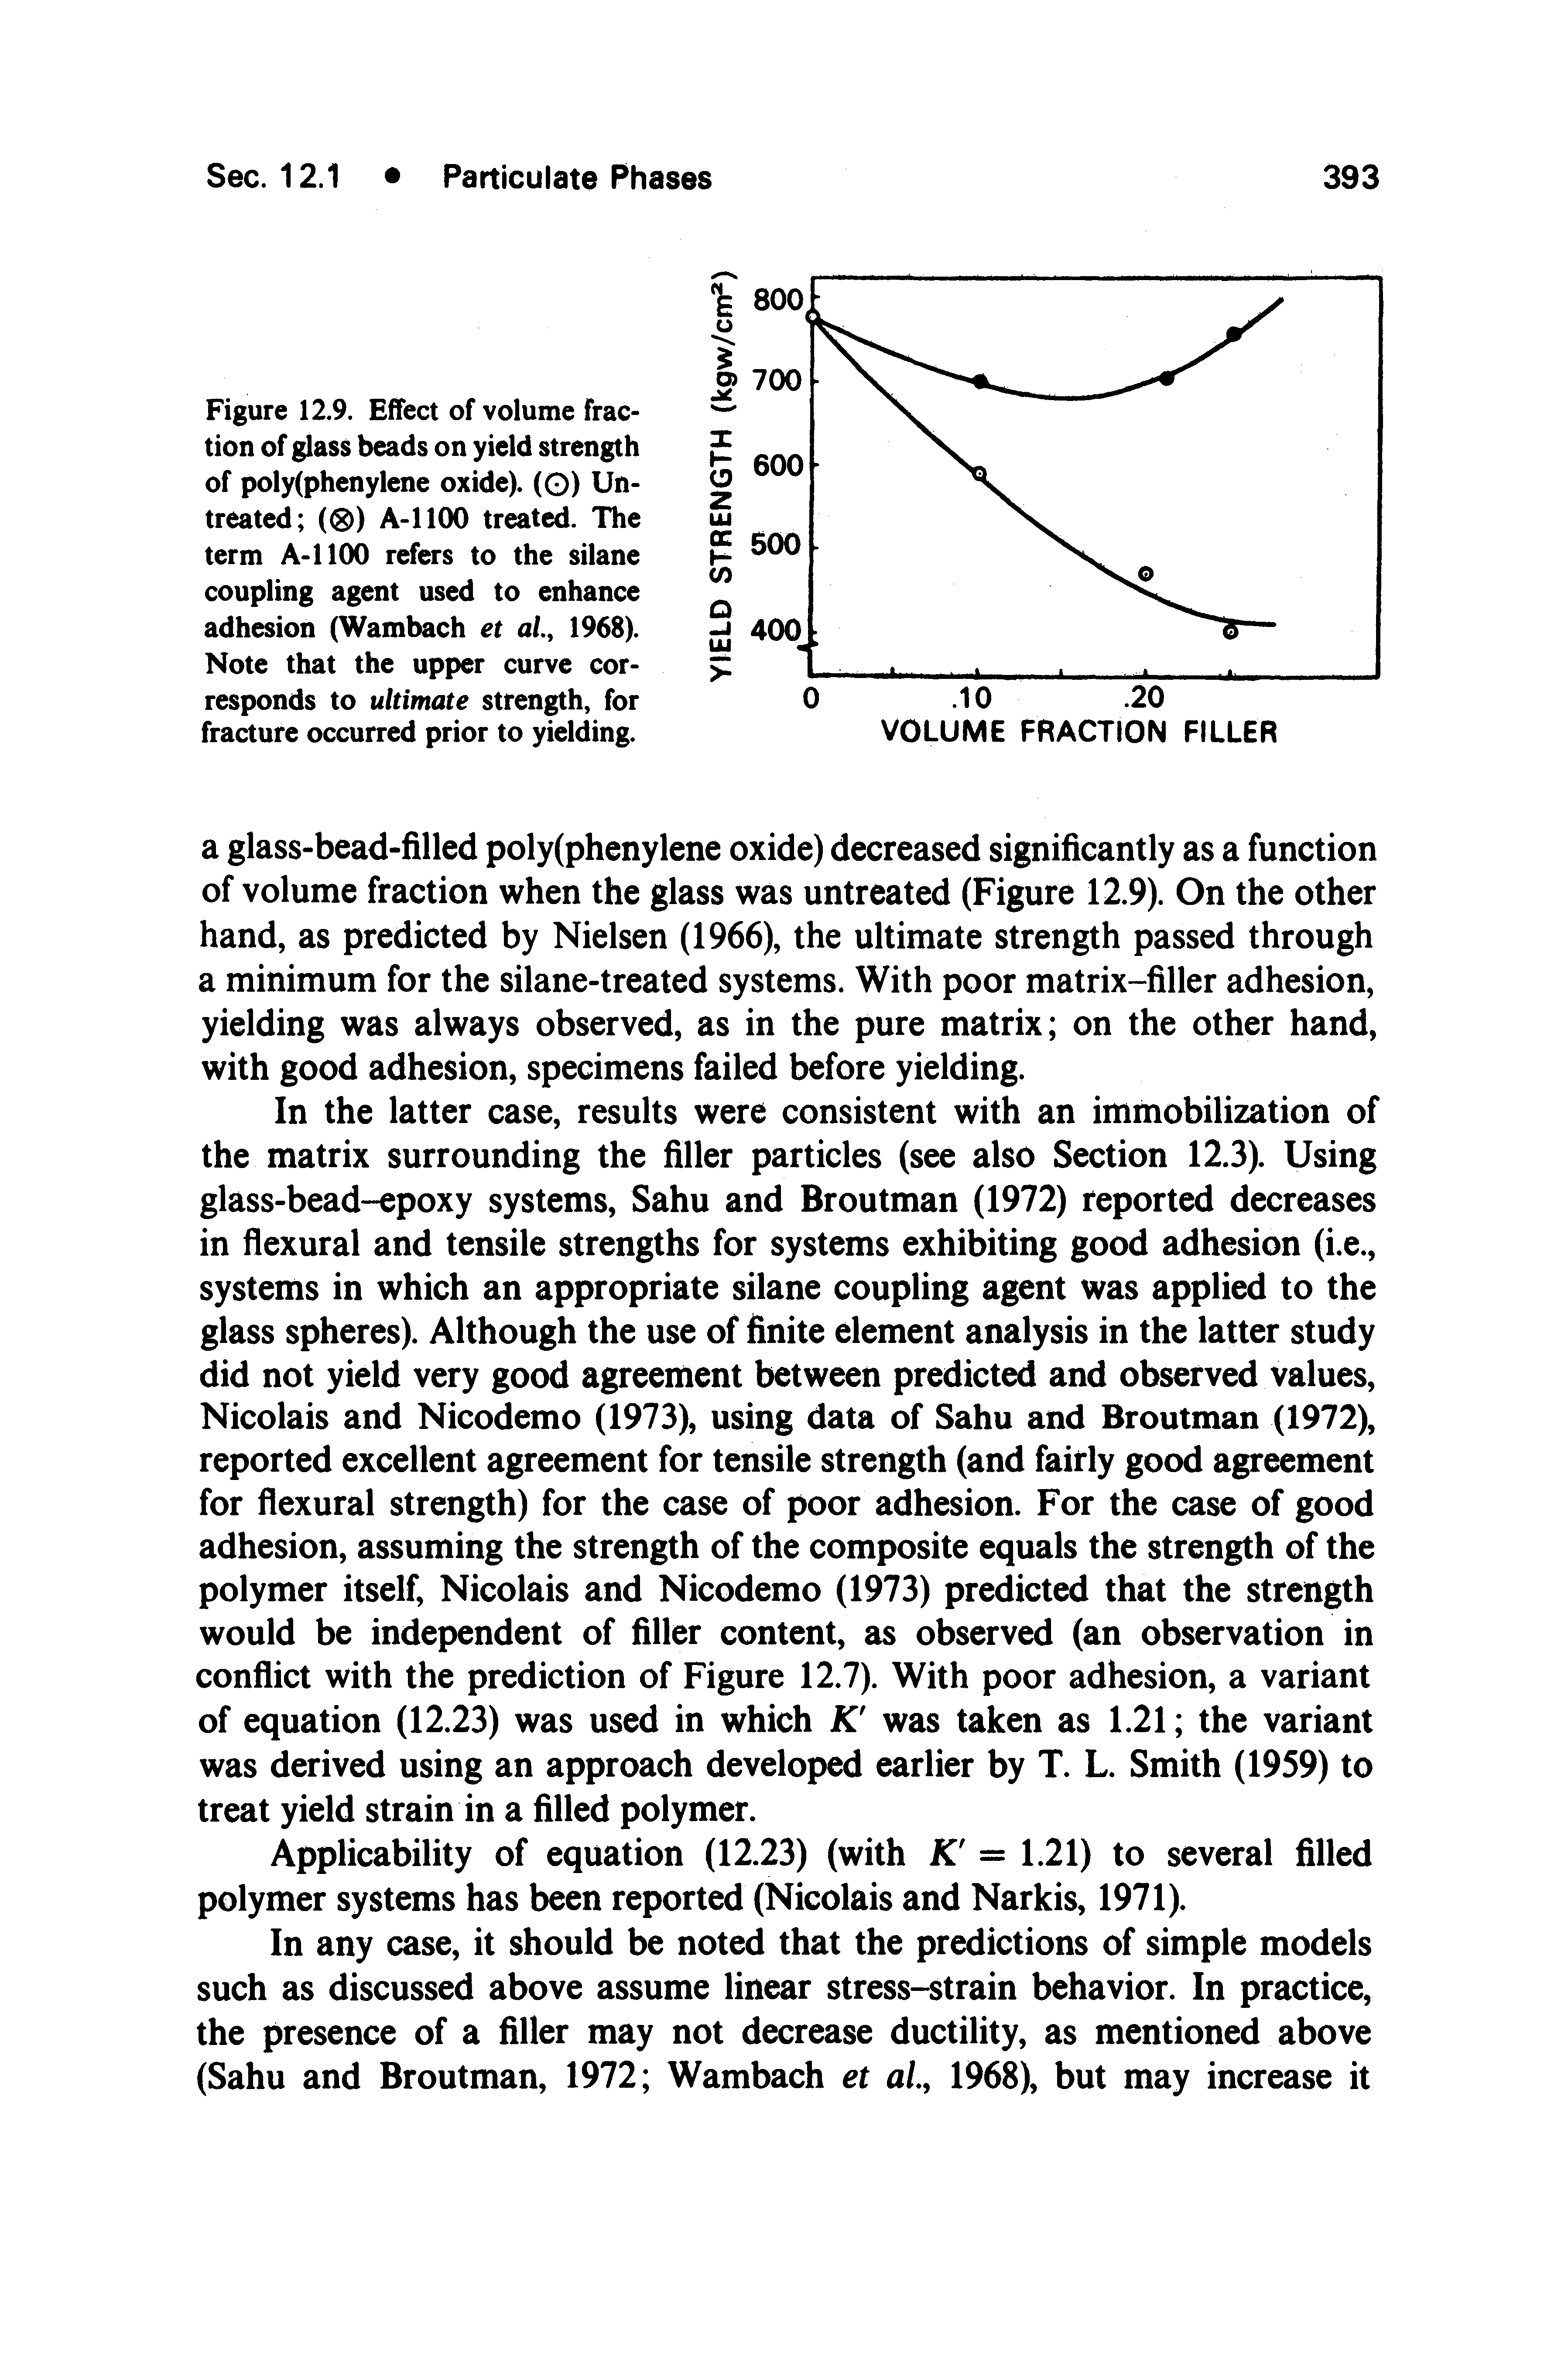 Figure 12.9. Effect of volume fraction of glass beads on yield strength of poly(phenylene oxide). (O) Untreated ( ) A-llOO treated. The term A-1100 refers to the silane coupling agent used to enhance adhesion (Wambach et al., 1968). Note that the upper curve corresponds to ultimate strength, for fracture occurred prior to yielding.